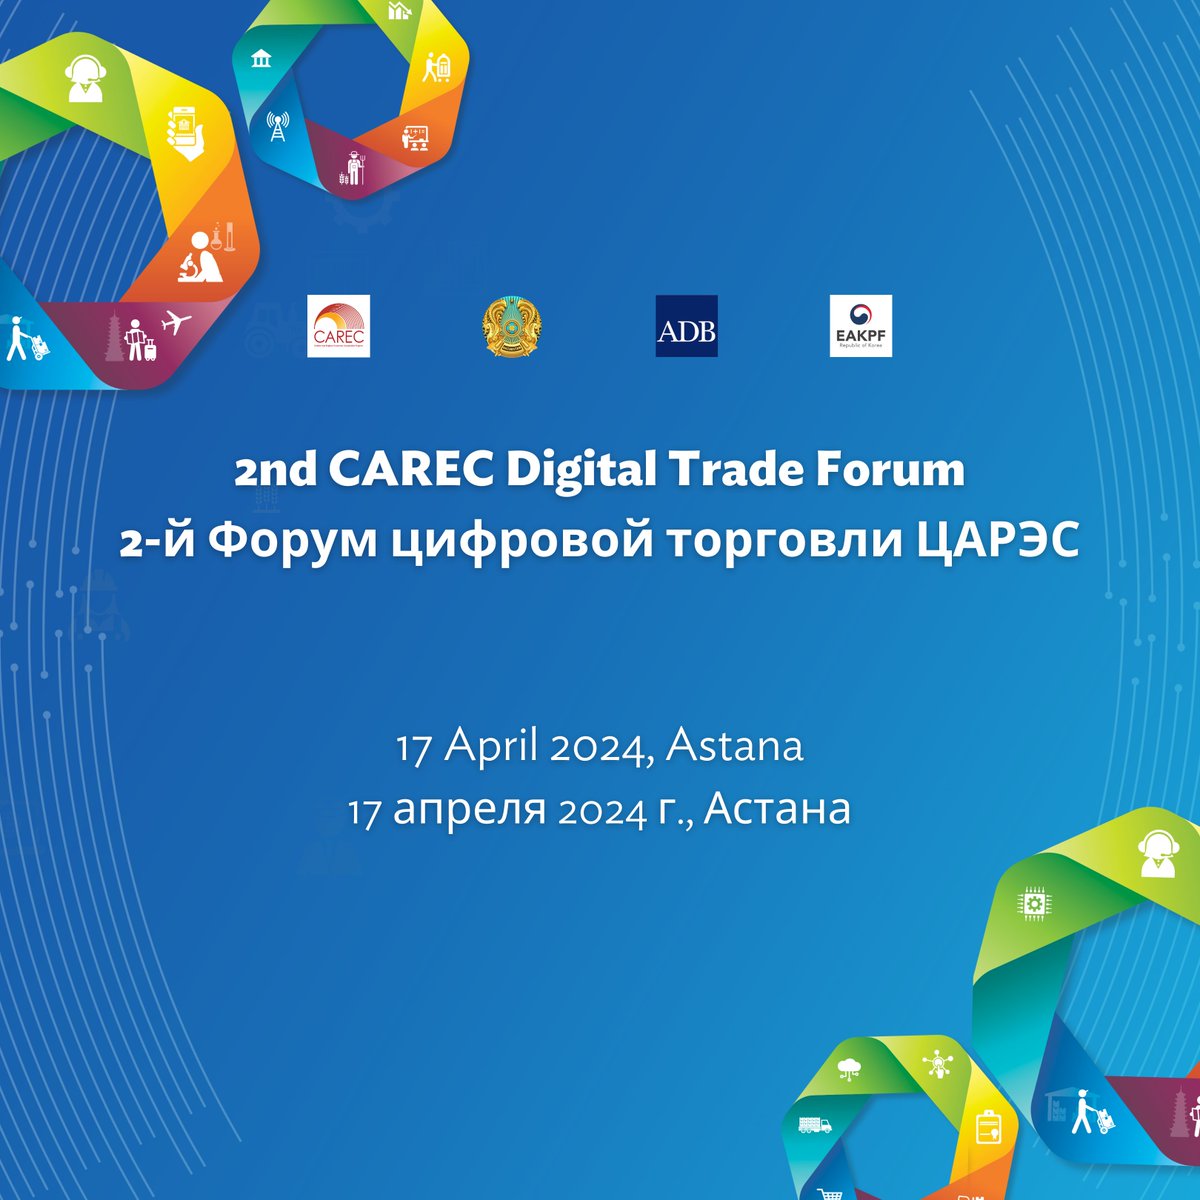 Join the 2nd CAREC Digital Trade Forum to learn lessons on how data governance can balance free data flow while considering policy concerns of privacy, competition, cybersecurity, and national security. 📅 April 17, 2024 🕒 10:00-17:00 Astana time 🔗 bit.ly/3vUk9AI